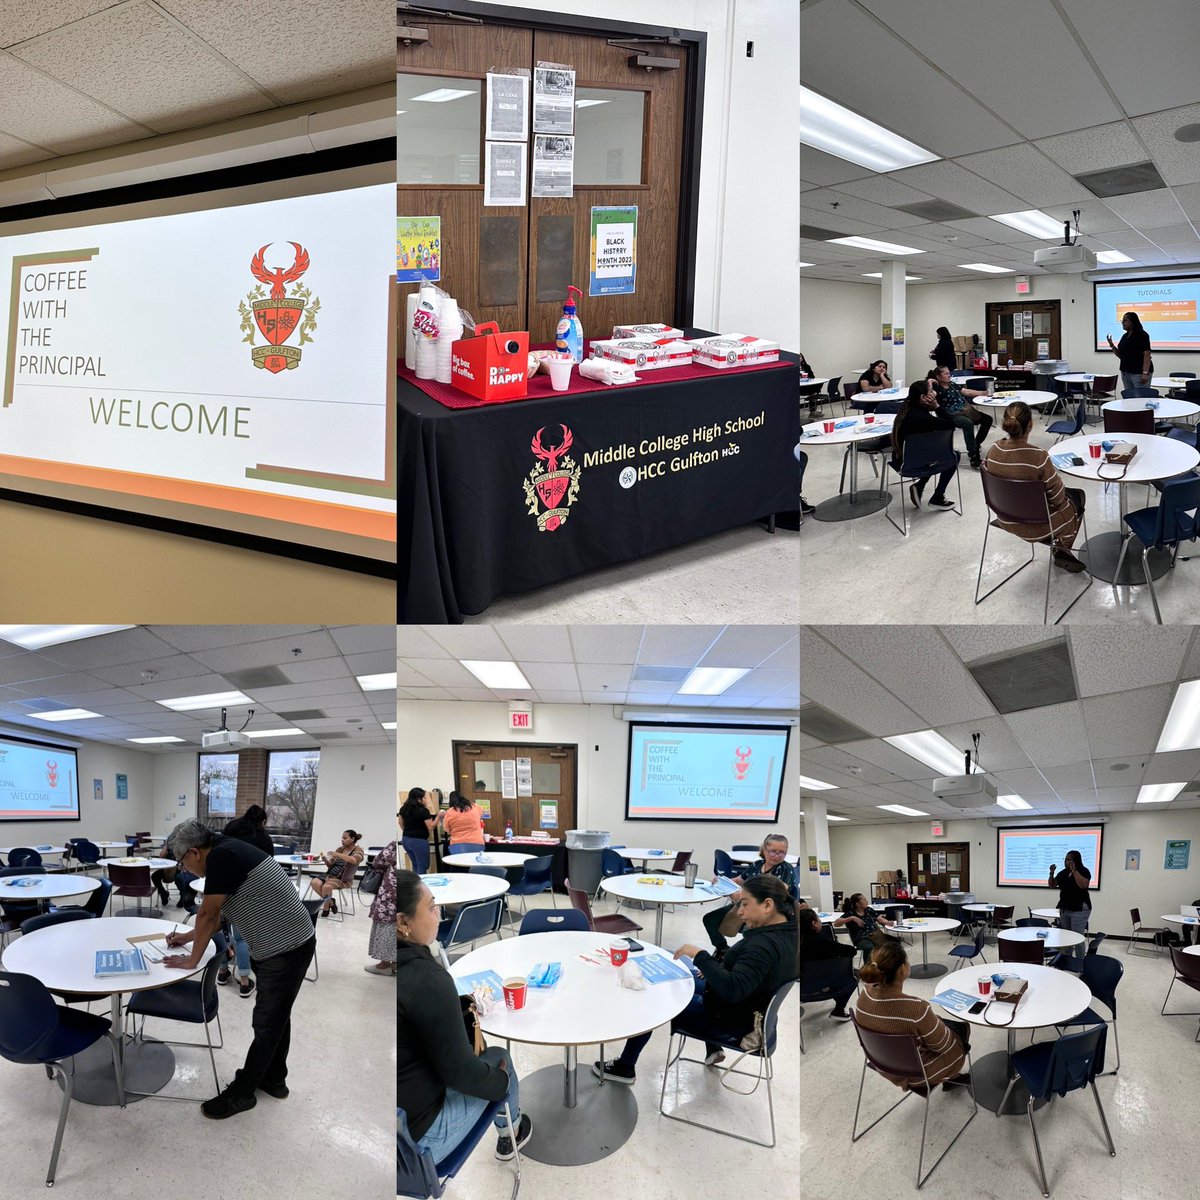 Thank you parents for joining us. Learning about @SELHISD. Sharing resources to help parents understand state testing and how to support students at home. Special thanks to Ms.Garcia with the Major Office provided information about our community. #coffeewiththeprinciapl